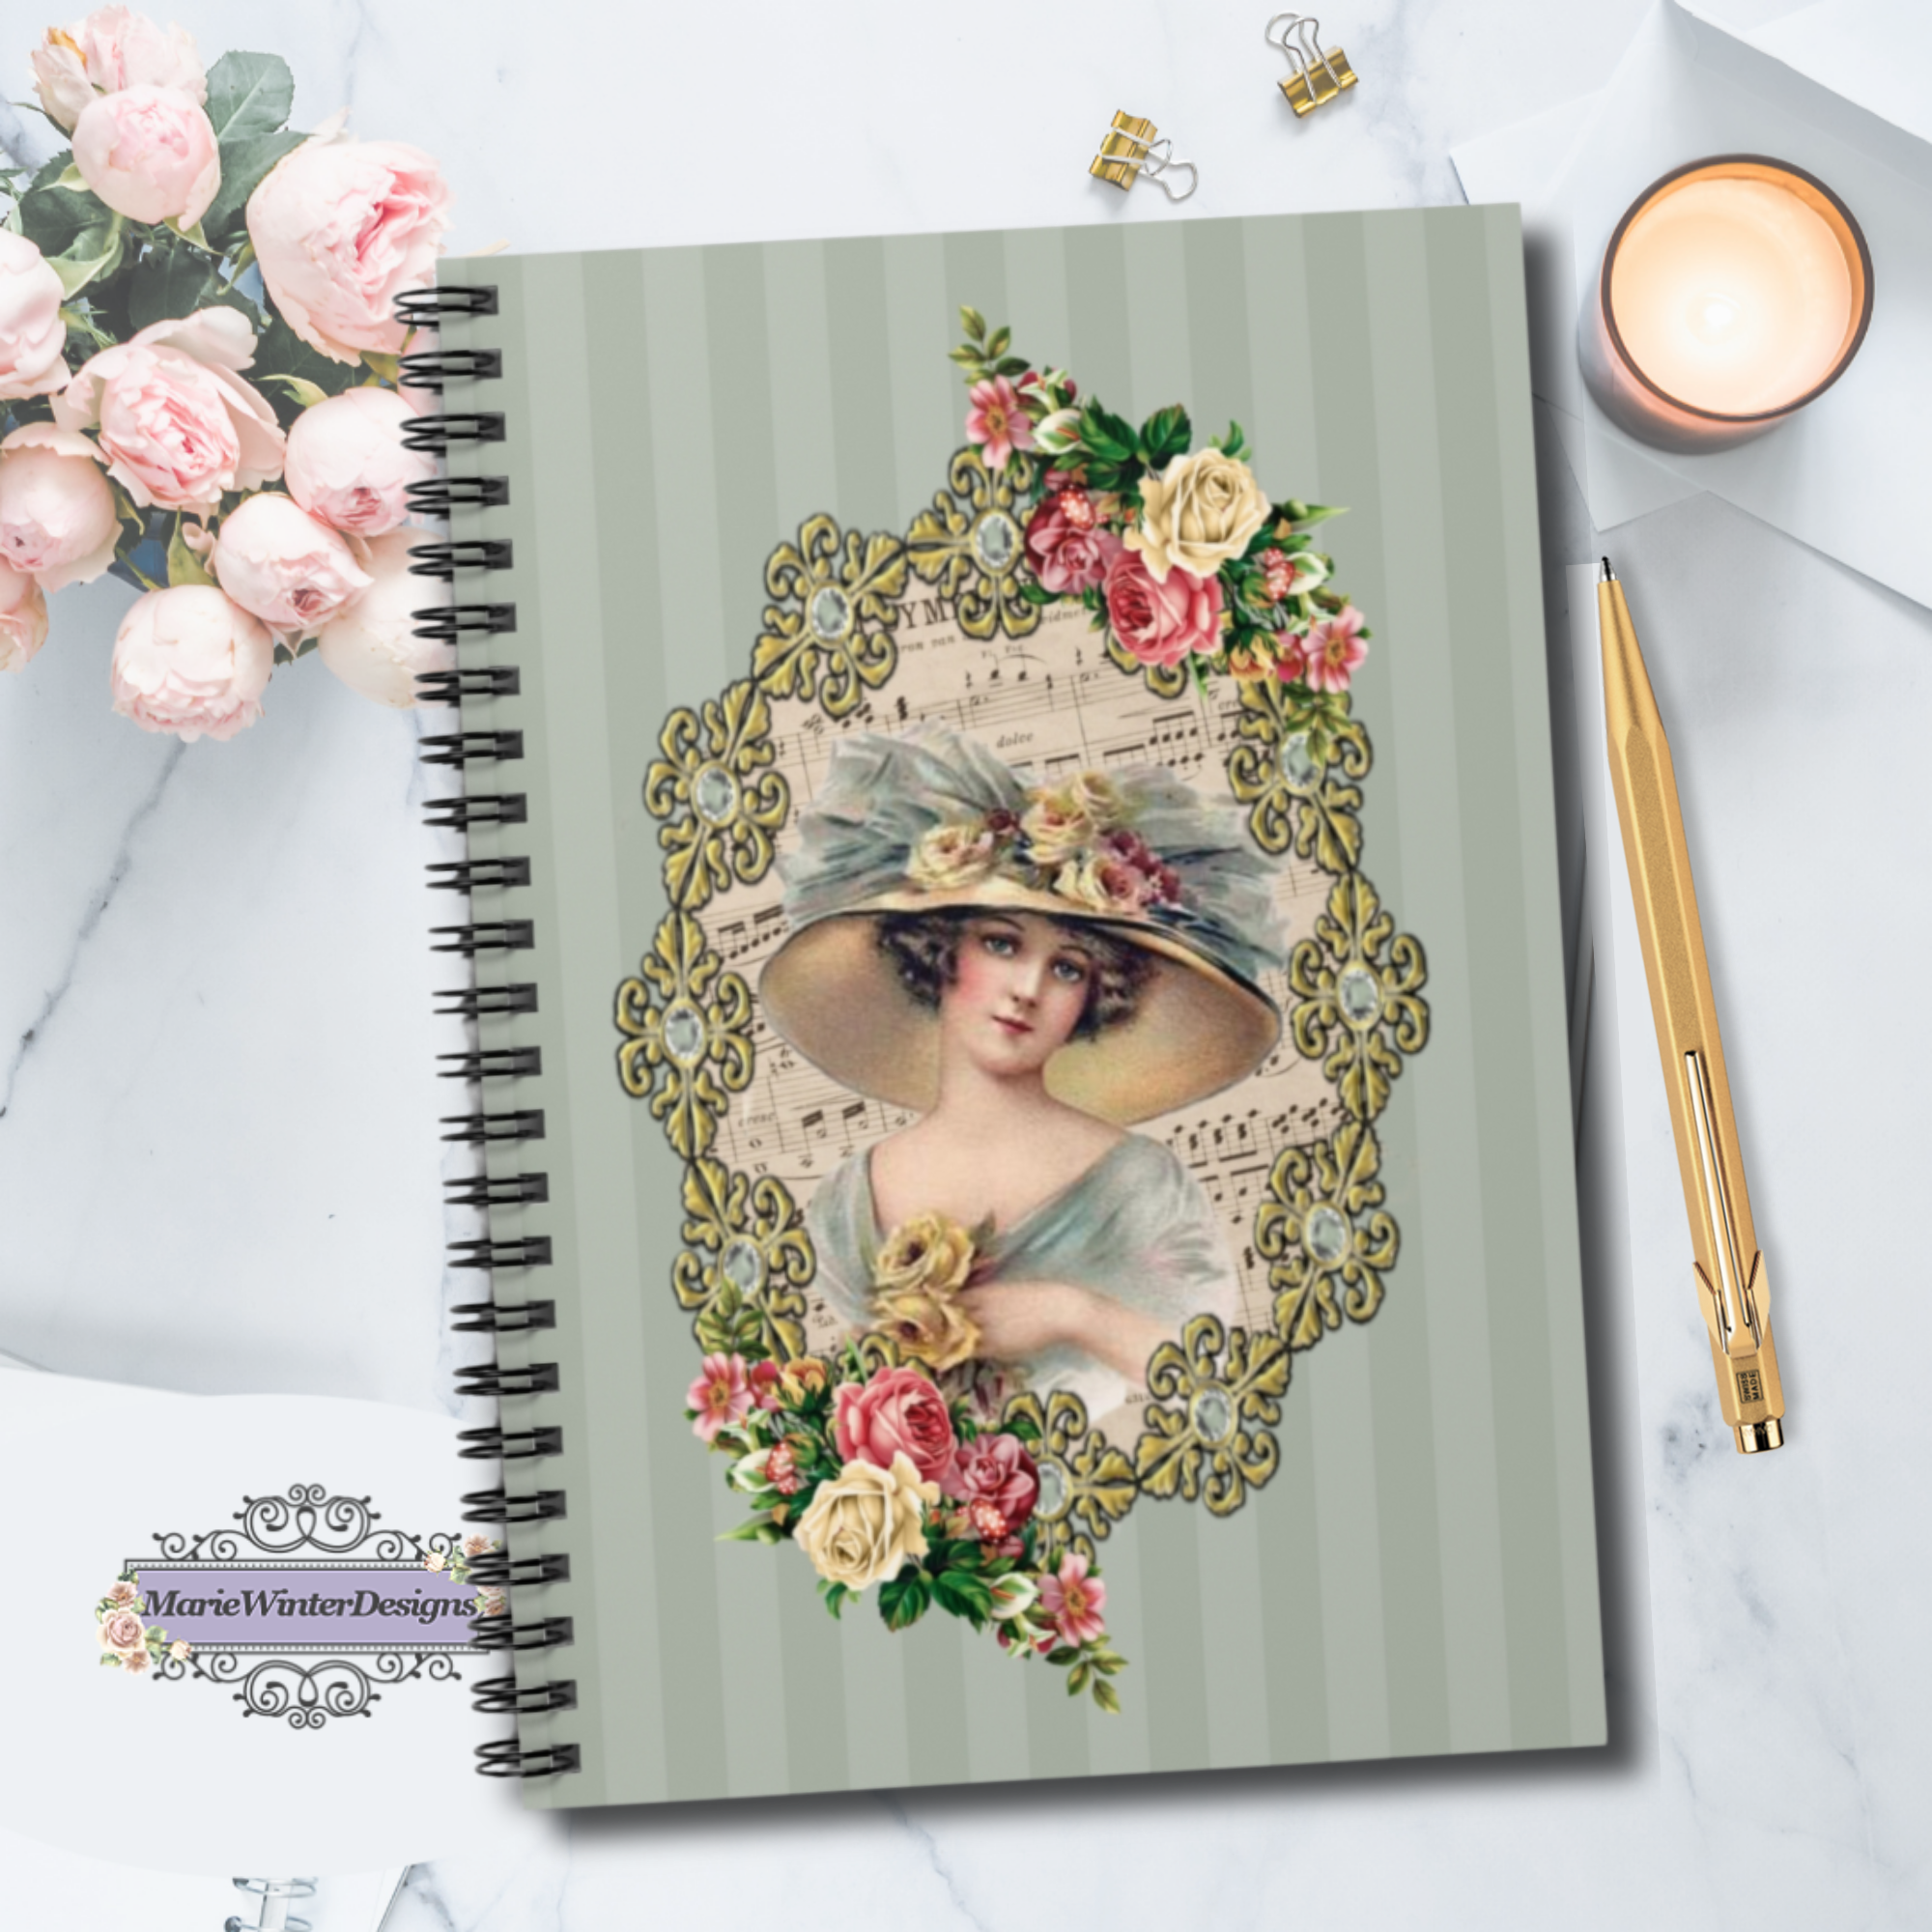 Spiral Bound Notebook Journal With Elegant Early 1900s Vintage Woman in a Large Hat Surrounded By gold filigrees accented with roses on Teal Stripes , candle, gold pen, pink roses behind